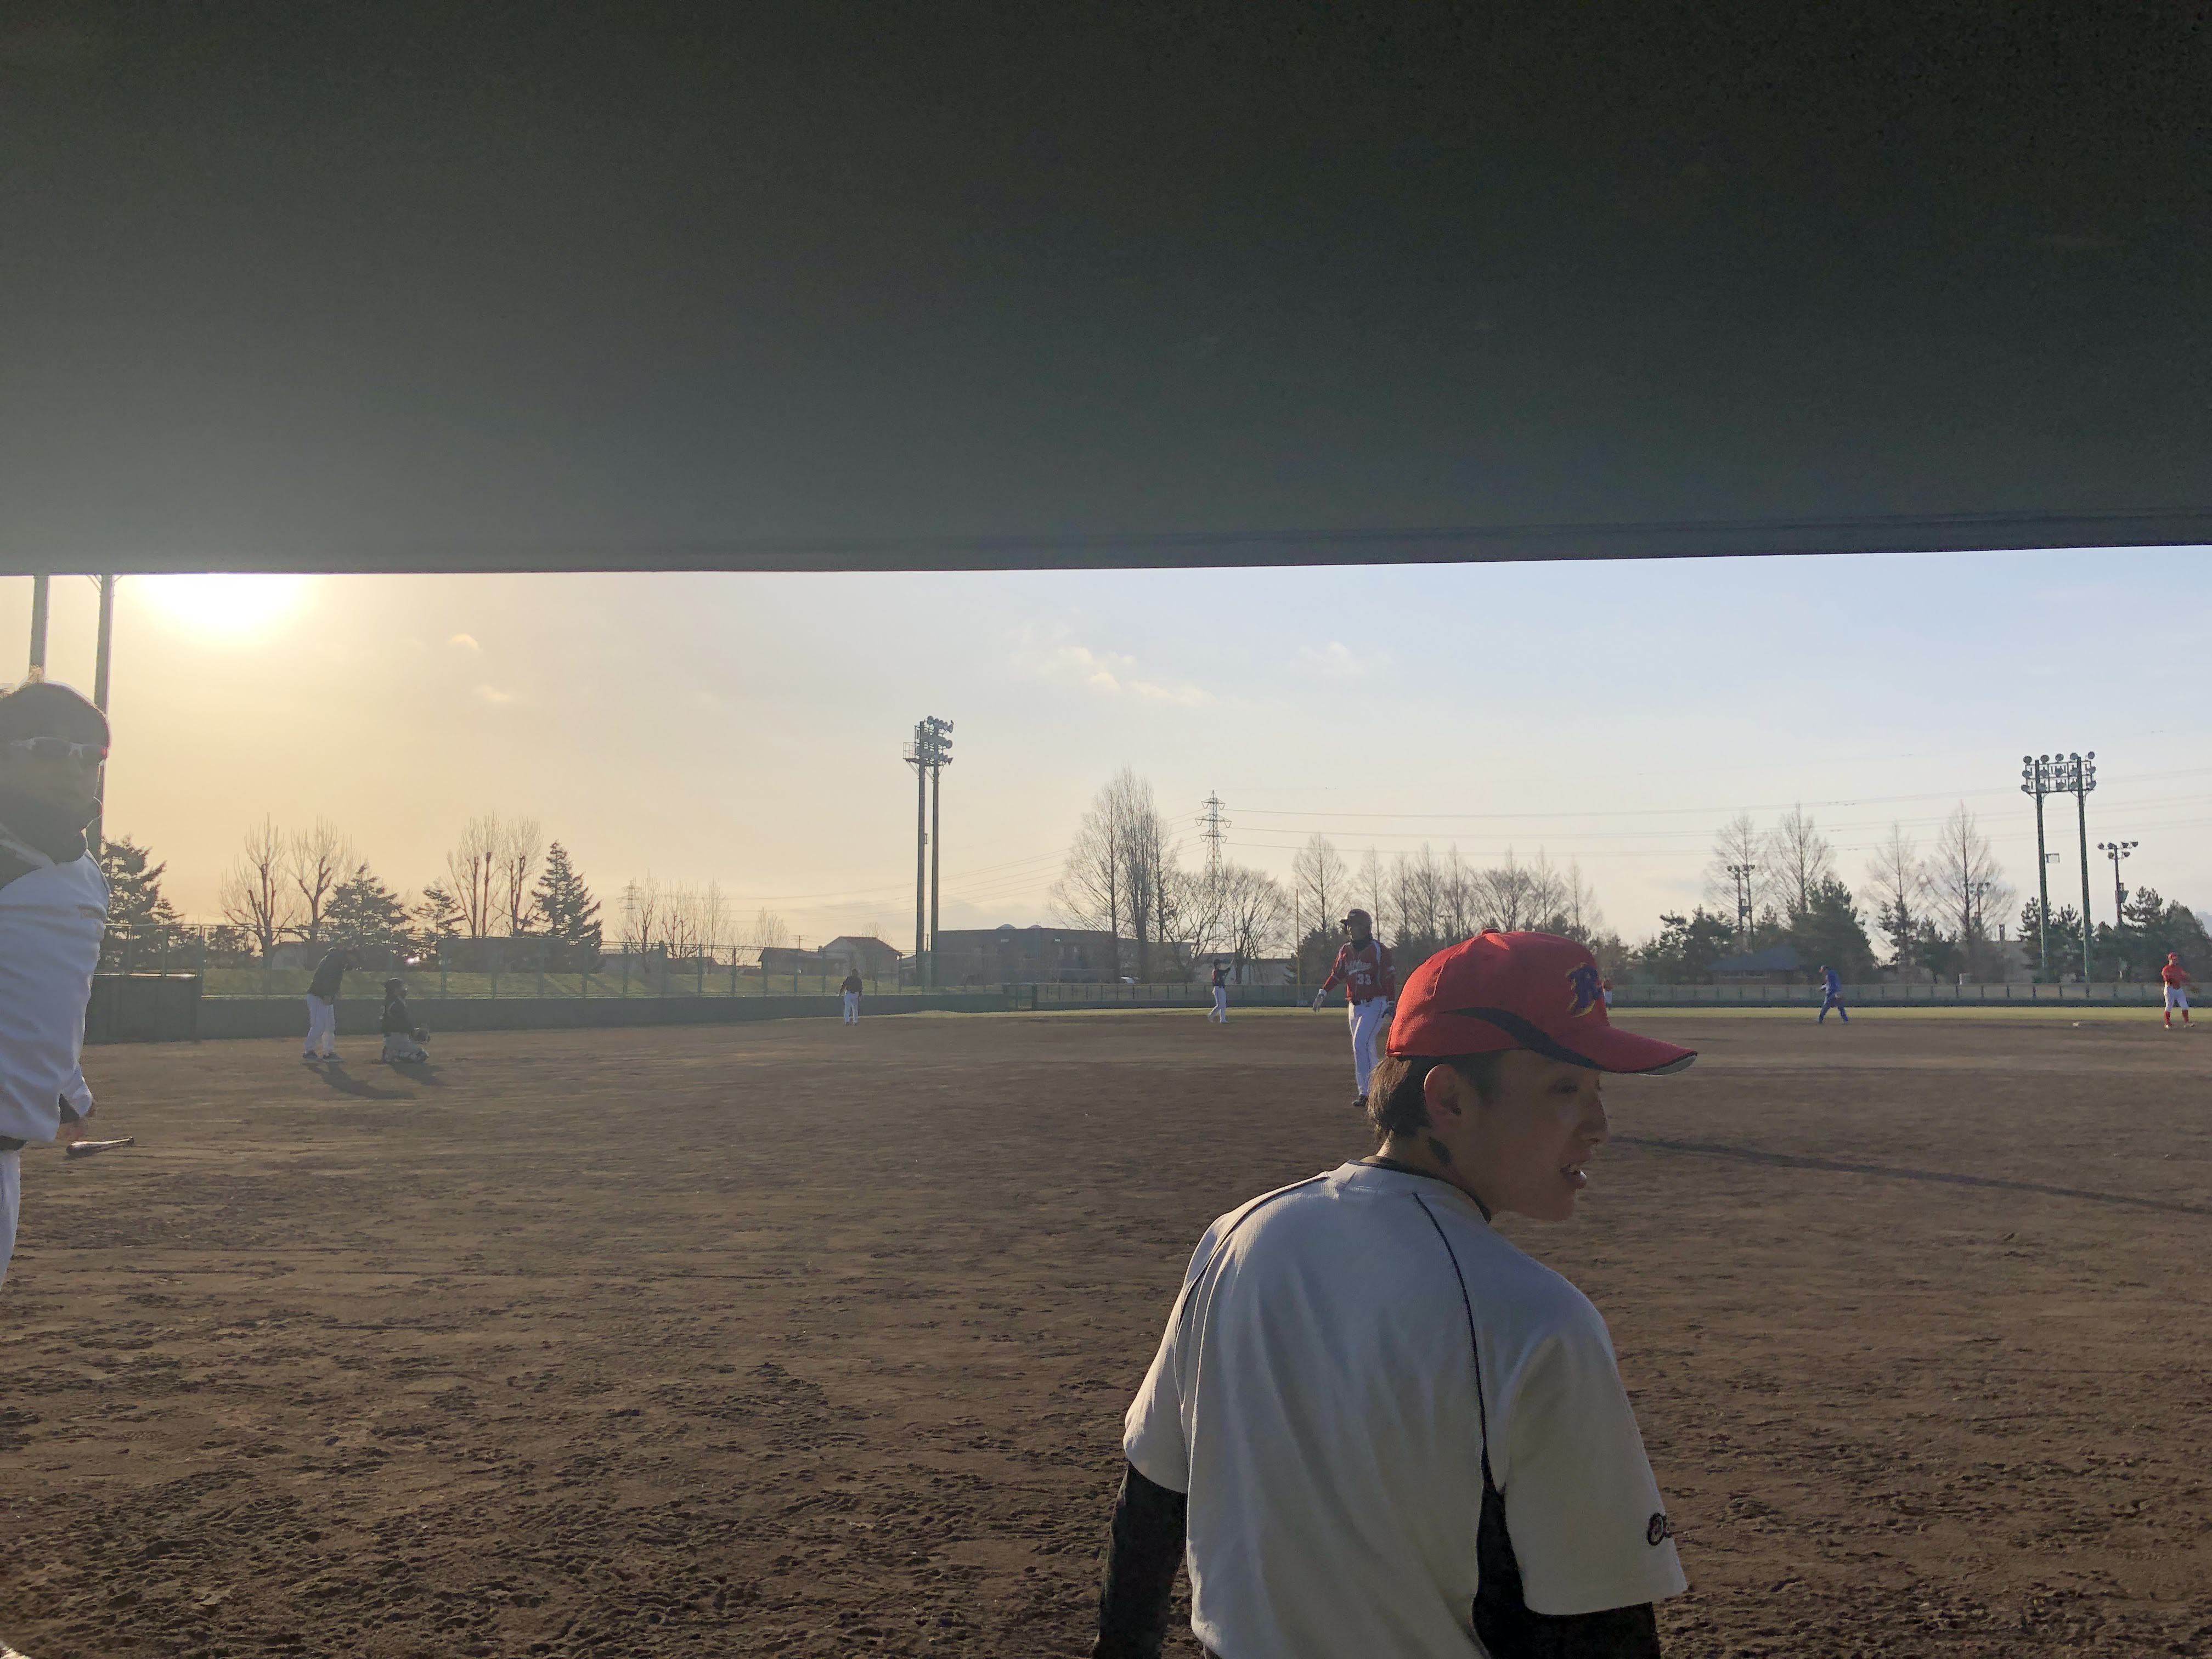 A bit after sunrise, mid-way through the game (our center fielder in front, a super nice guy)